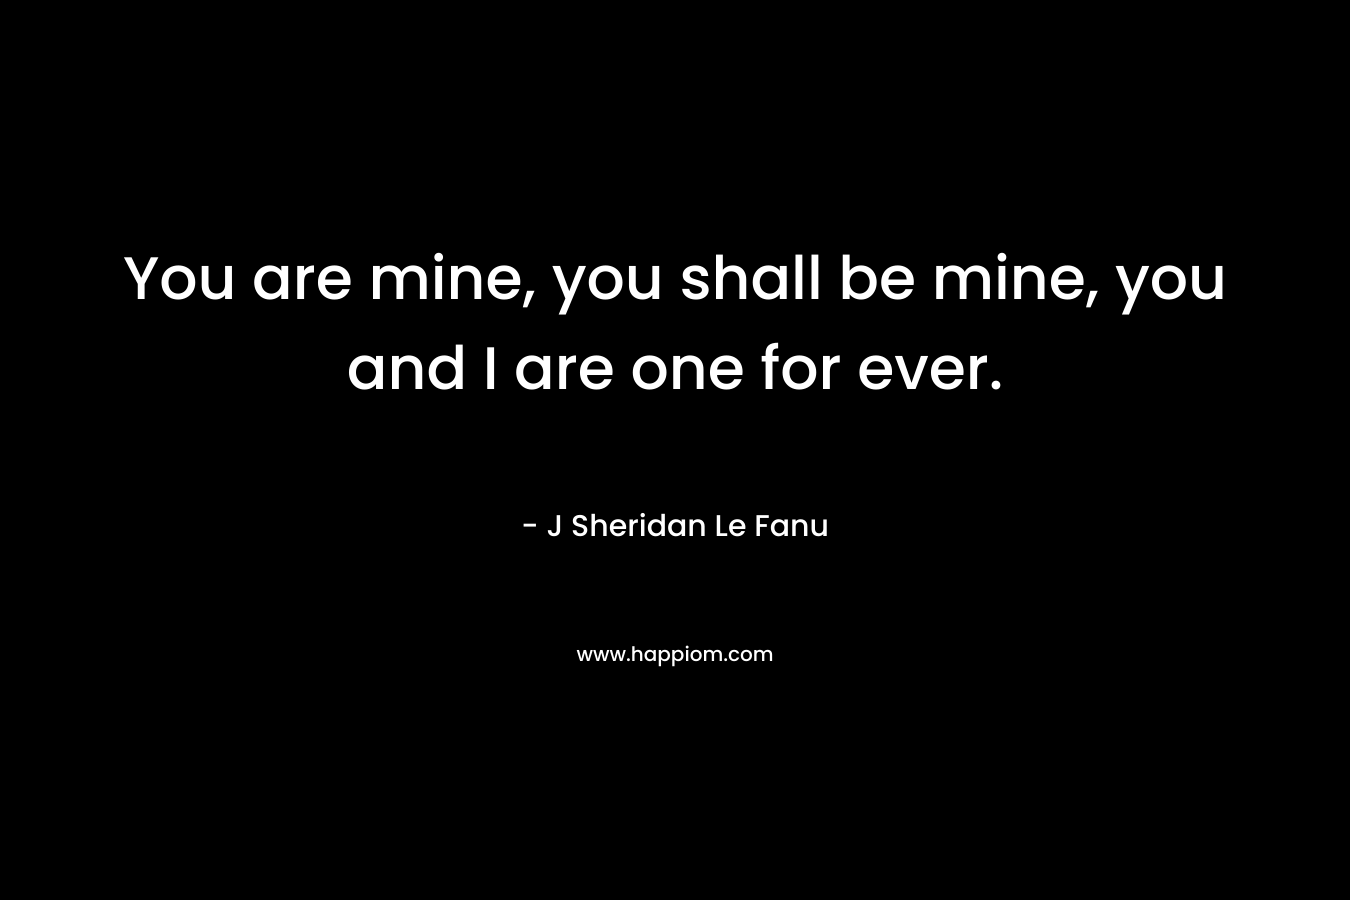 You are mine, you shall be mine, you and I are one for ever. – J Sheridan Le Fanu